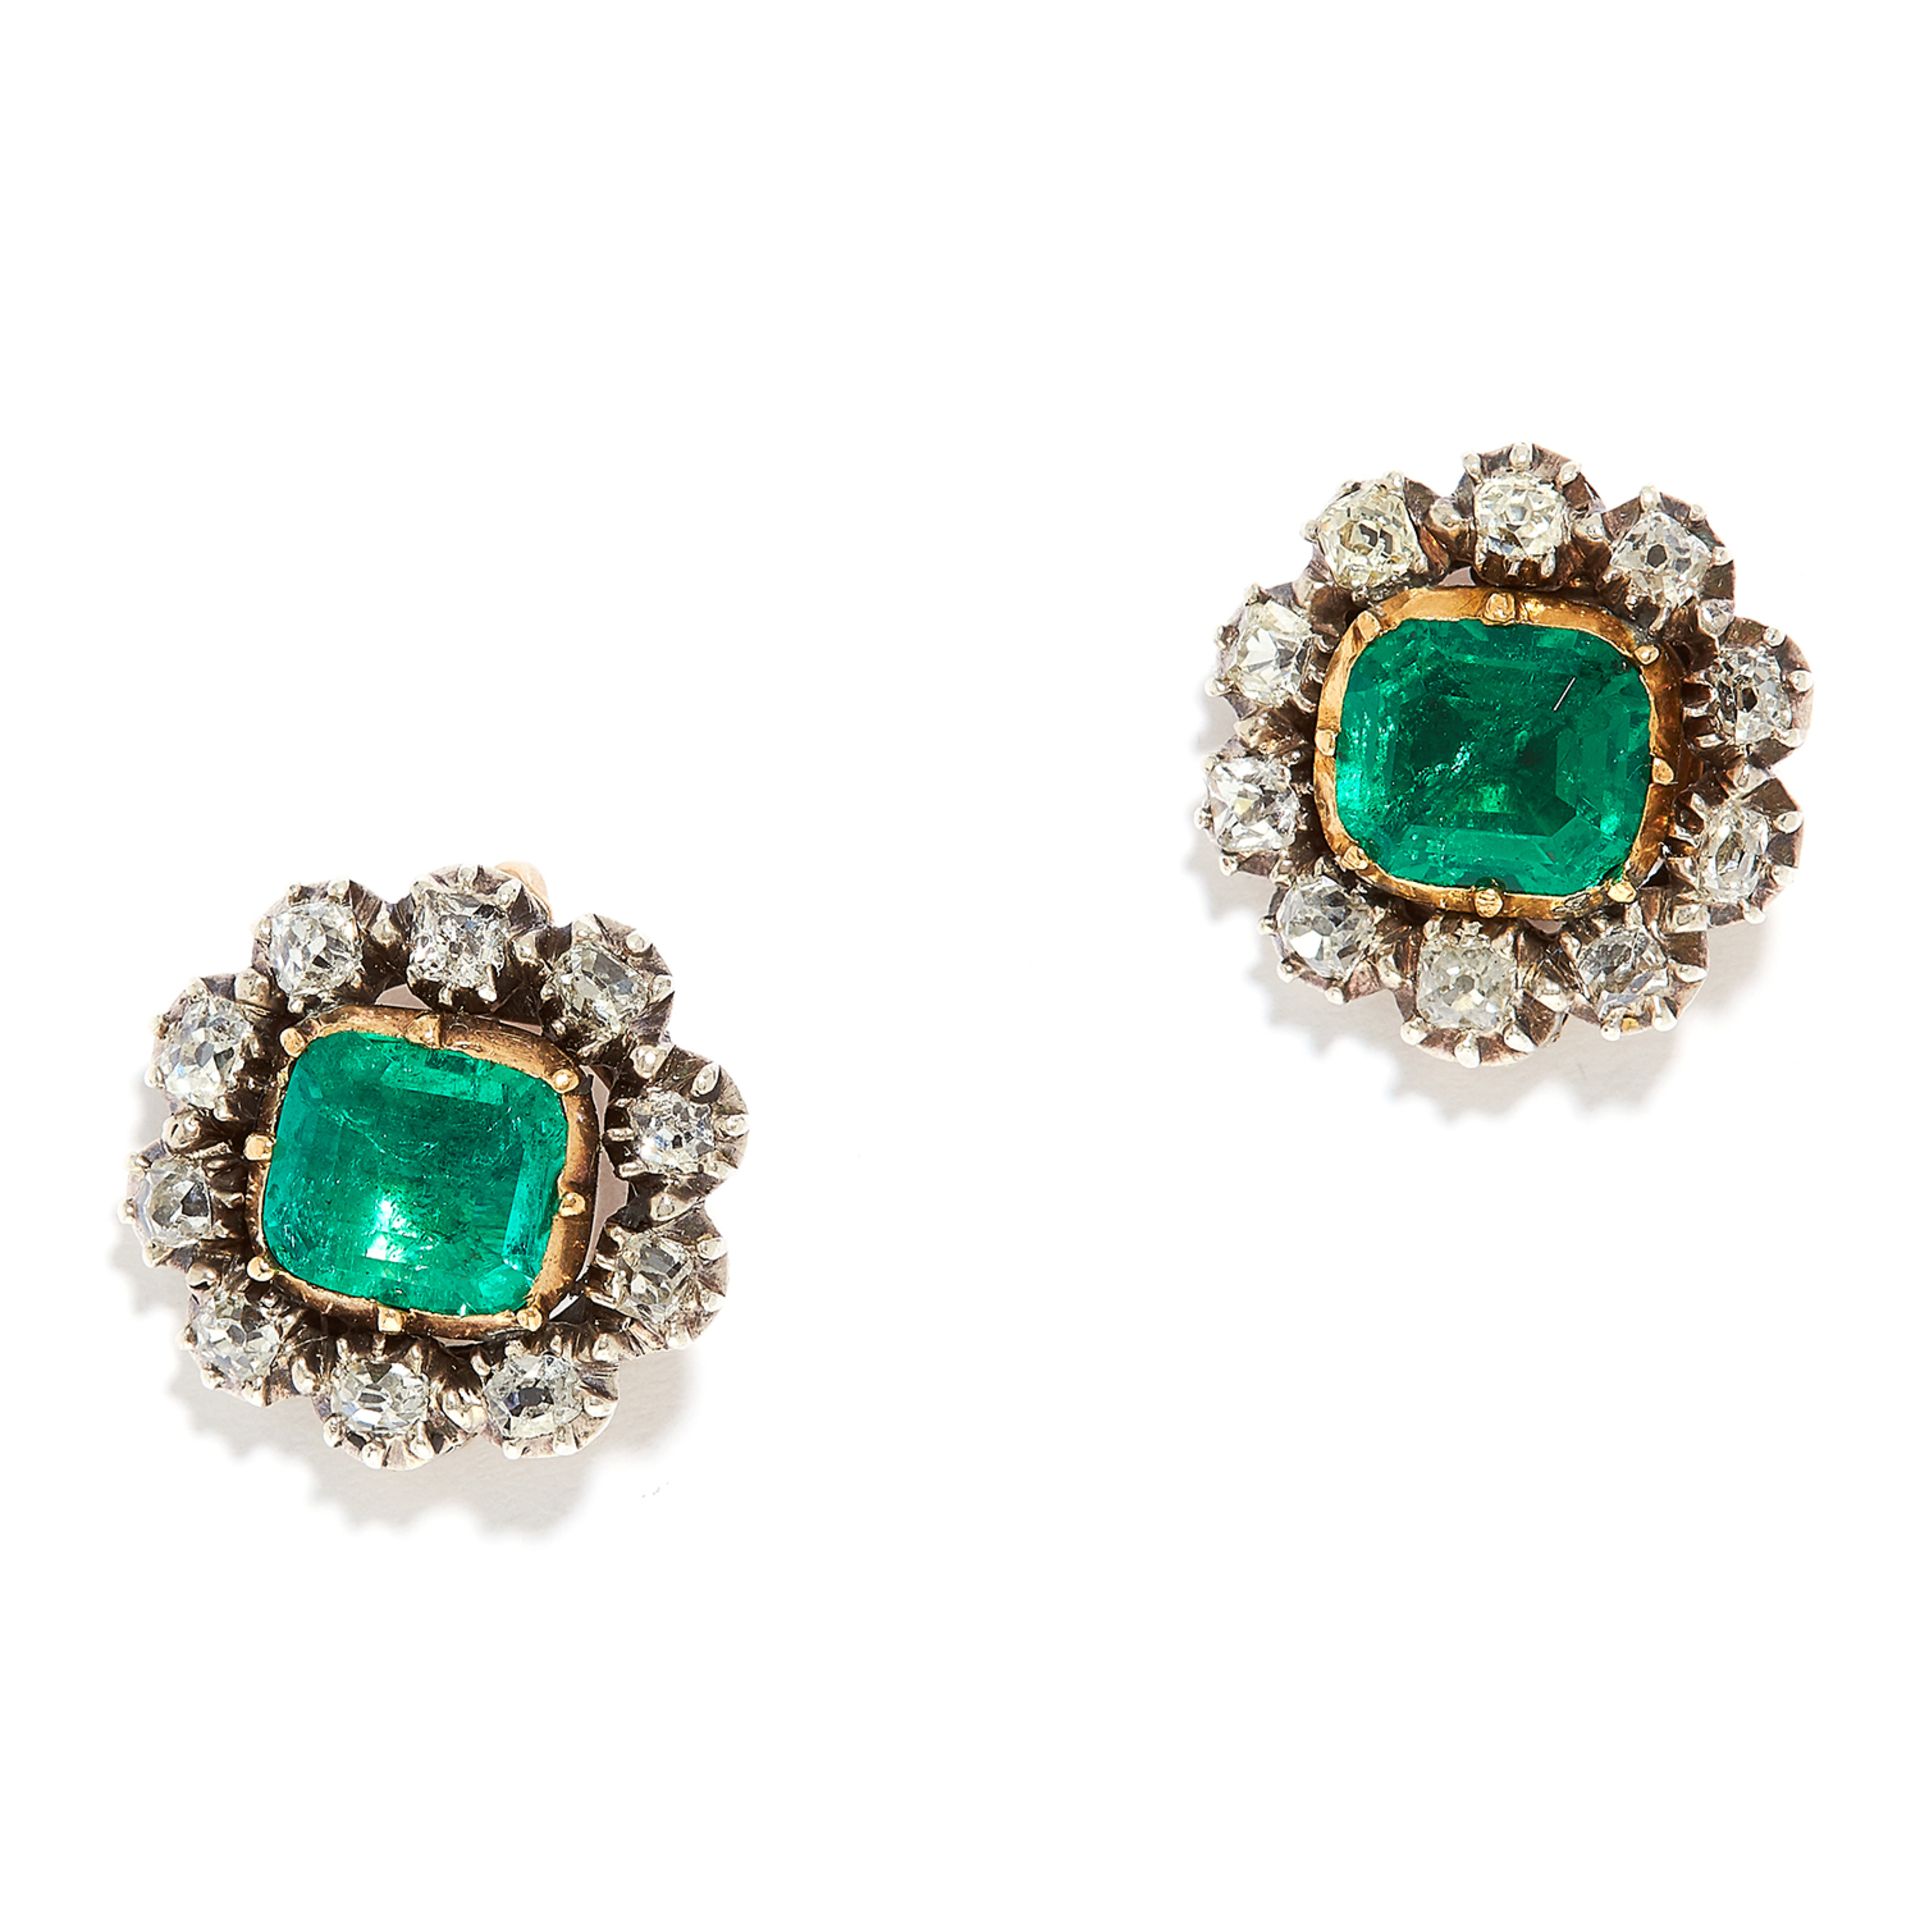 ANTIQUE EMERALD AND DIAMOND CLUSTER EARRINGS in 18ct yellow gold, each set with an emerald cut